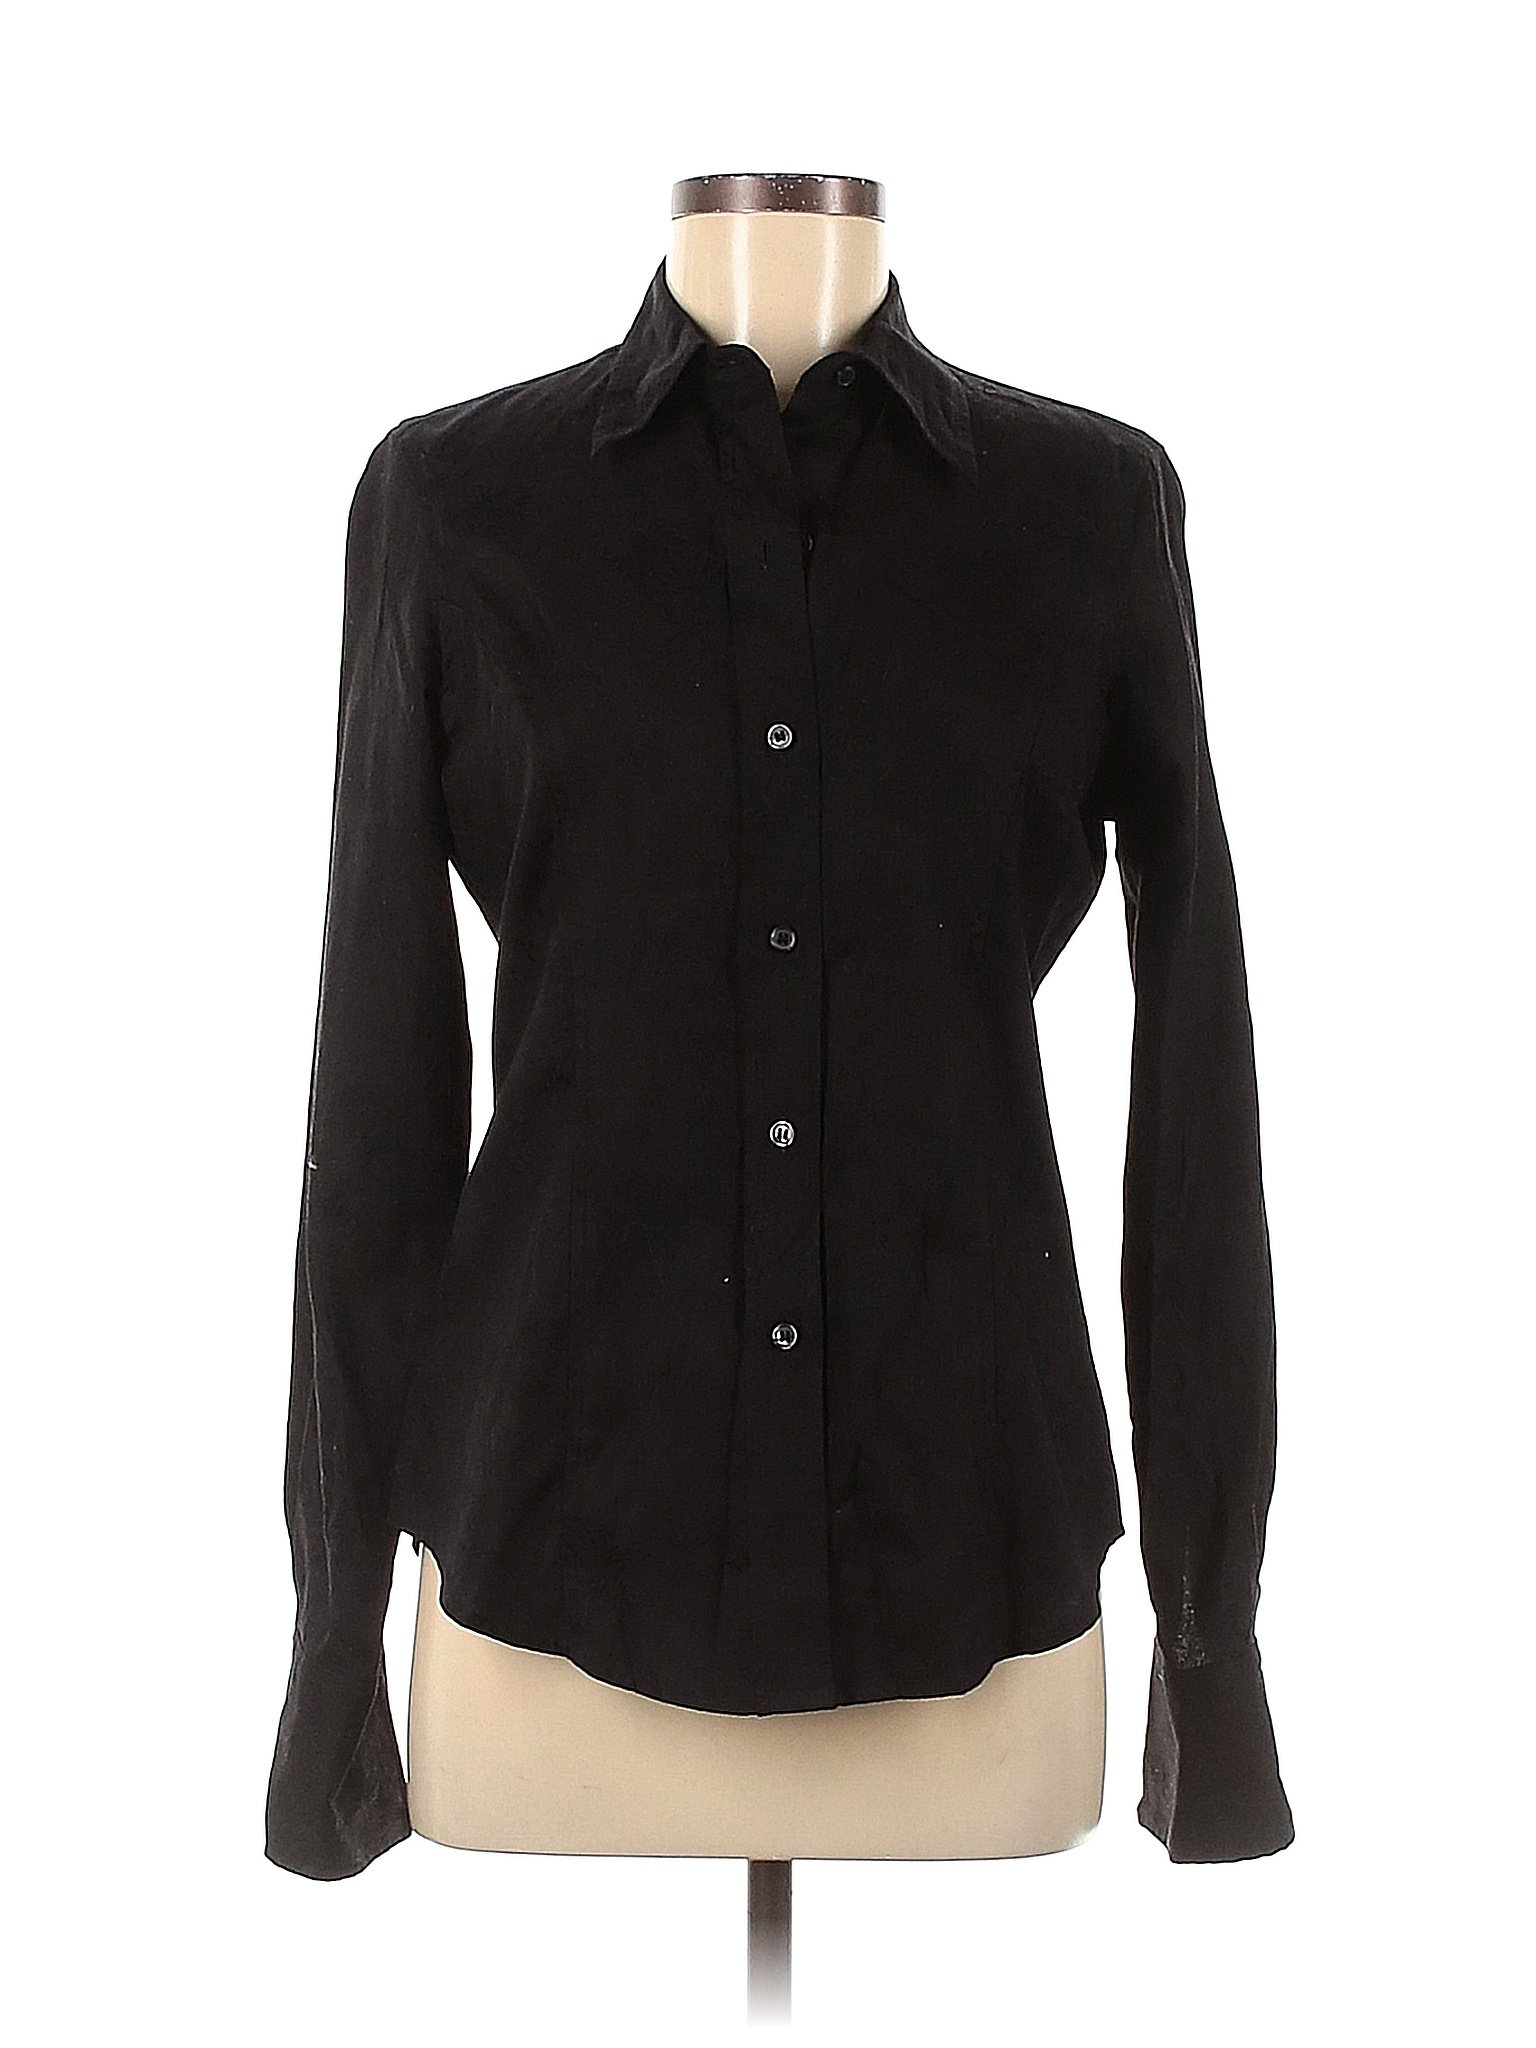 Rena Rowan 100% Cotton Solid Black Long Sleeve Blouse Size 6 - 85% off ...